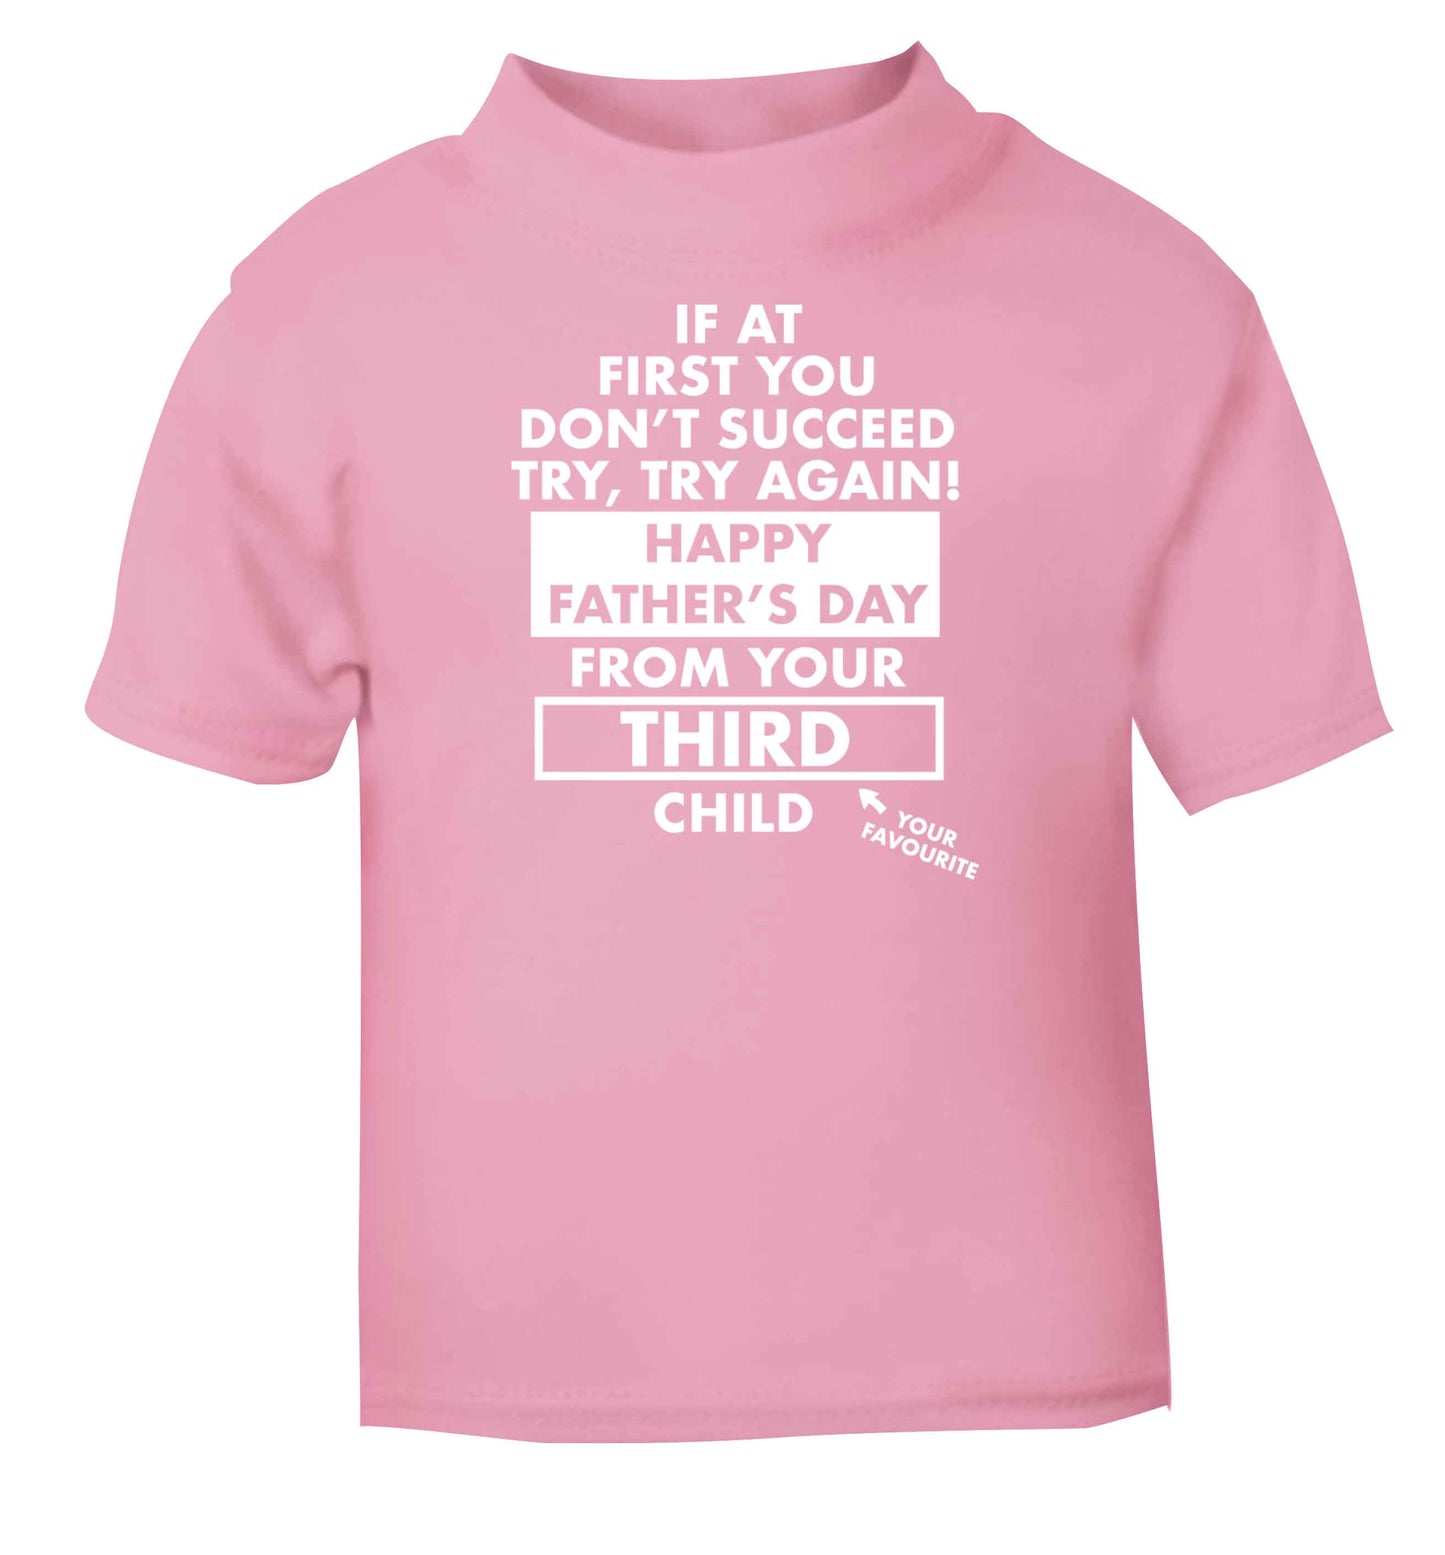 If at first you don't succeed try, try again Happy Father's day from your third child! light pink baby toddler Tshirt 2 Years